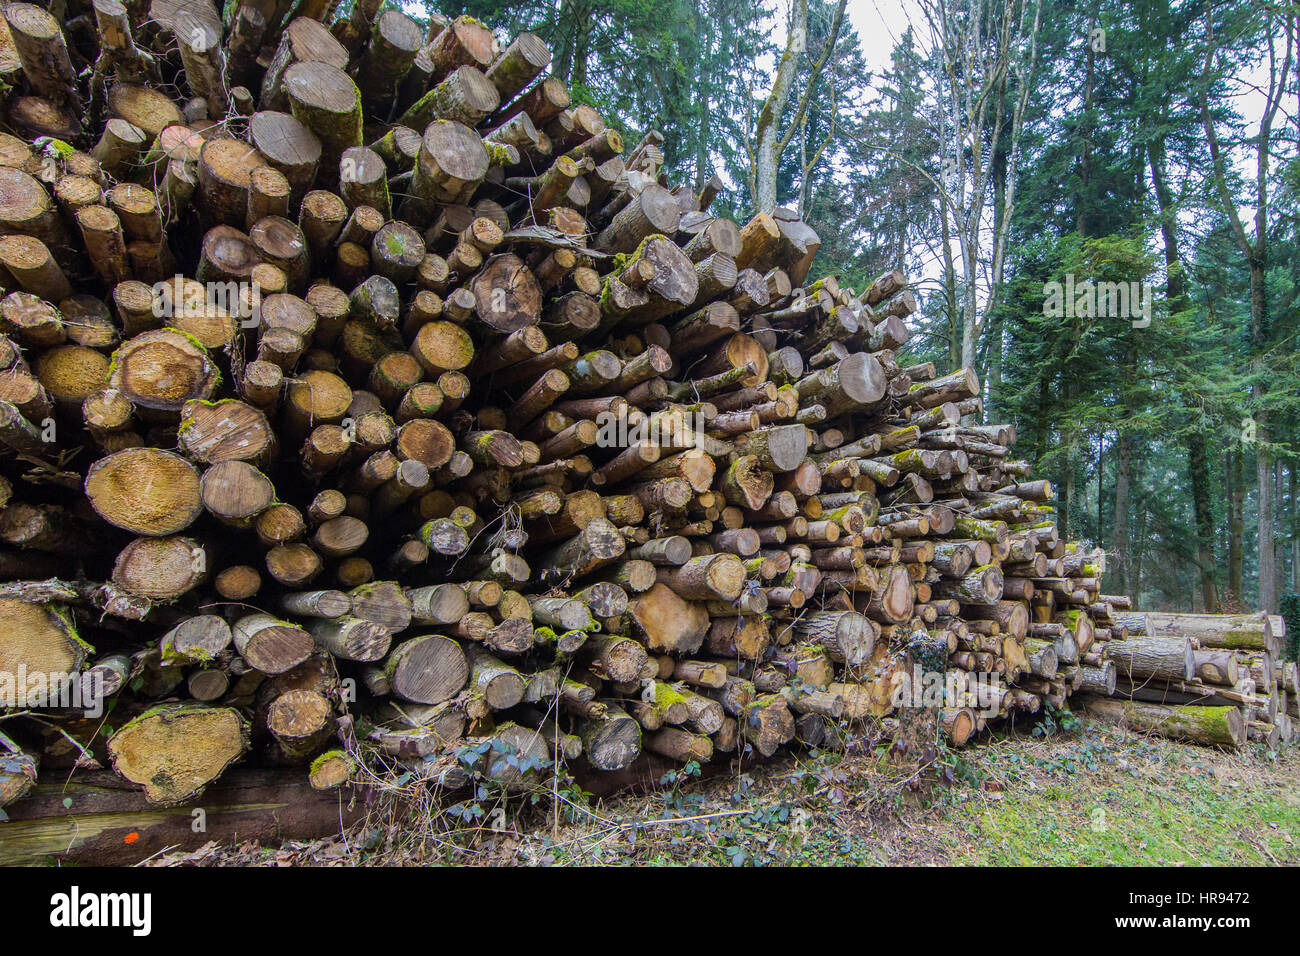 Natural log pile in the forest with trees Stock Photo